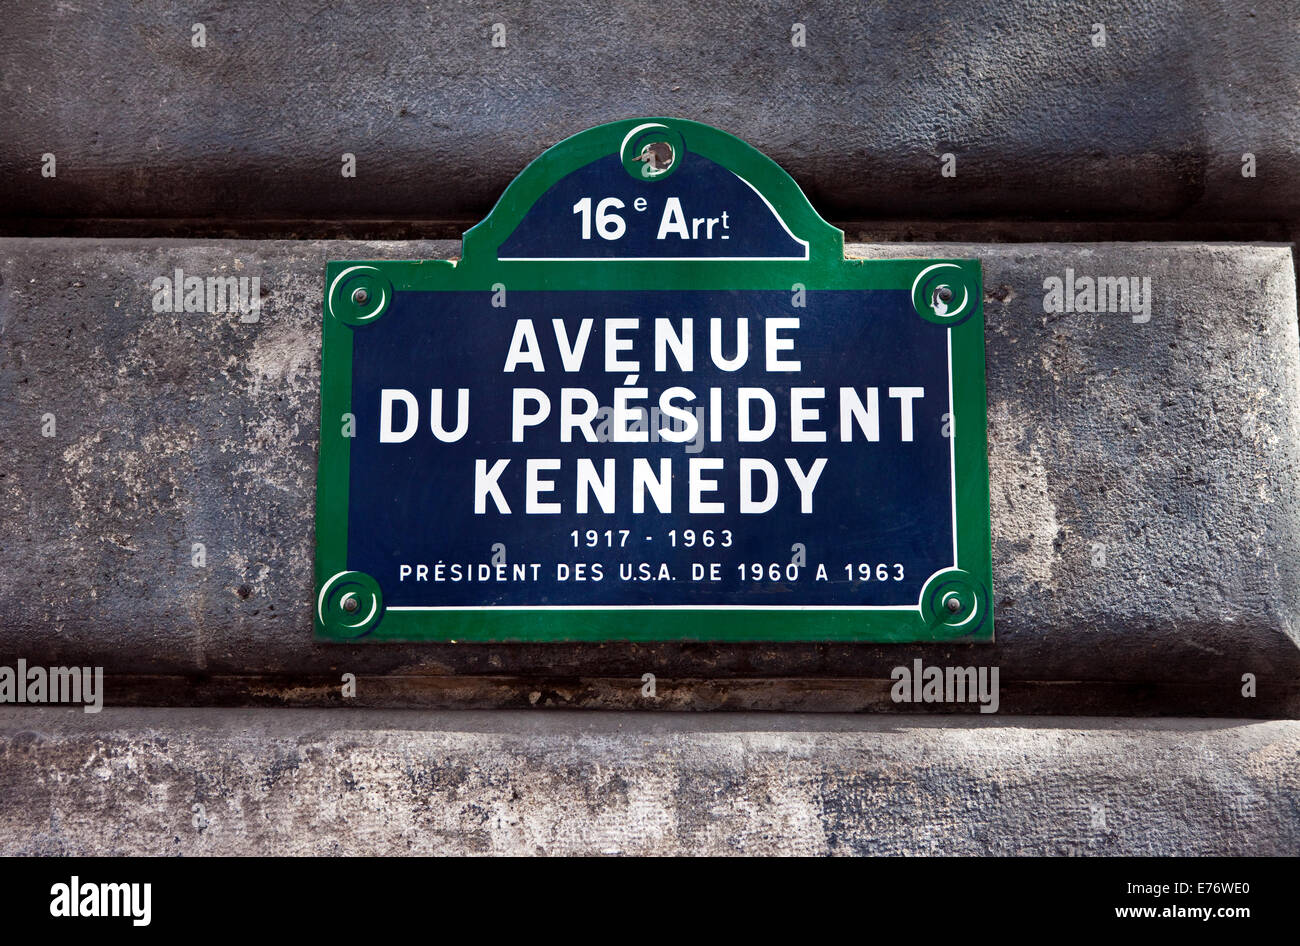 A street sign for Avenue du President Kennedy in Paris, named after the 35th President of the United States - John F. Kennedy. Stock Photo